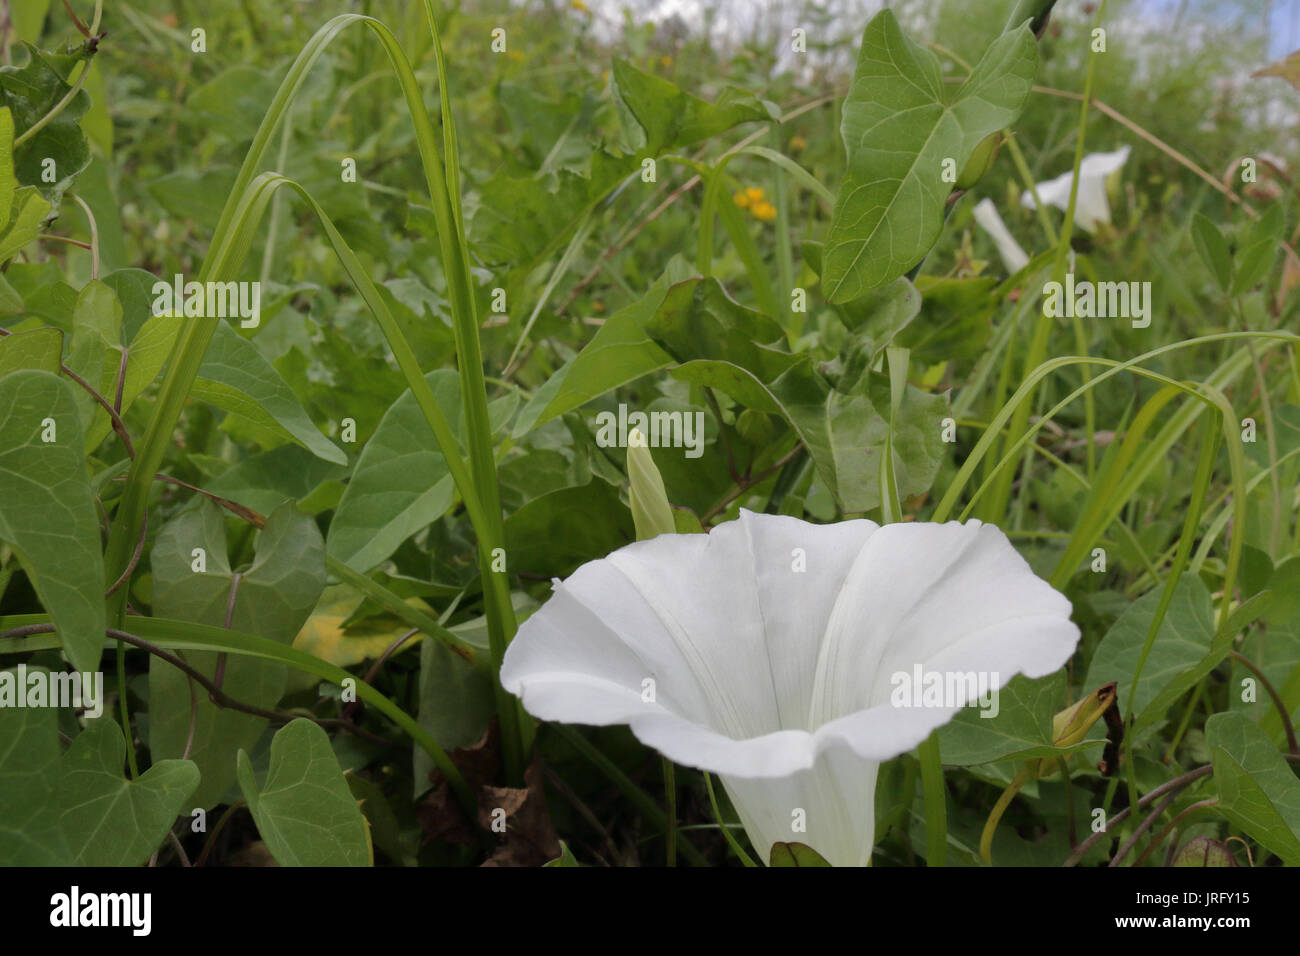 A close photo of a bell shaped white flower in green grass Stock Photo